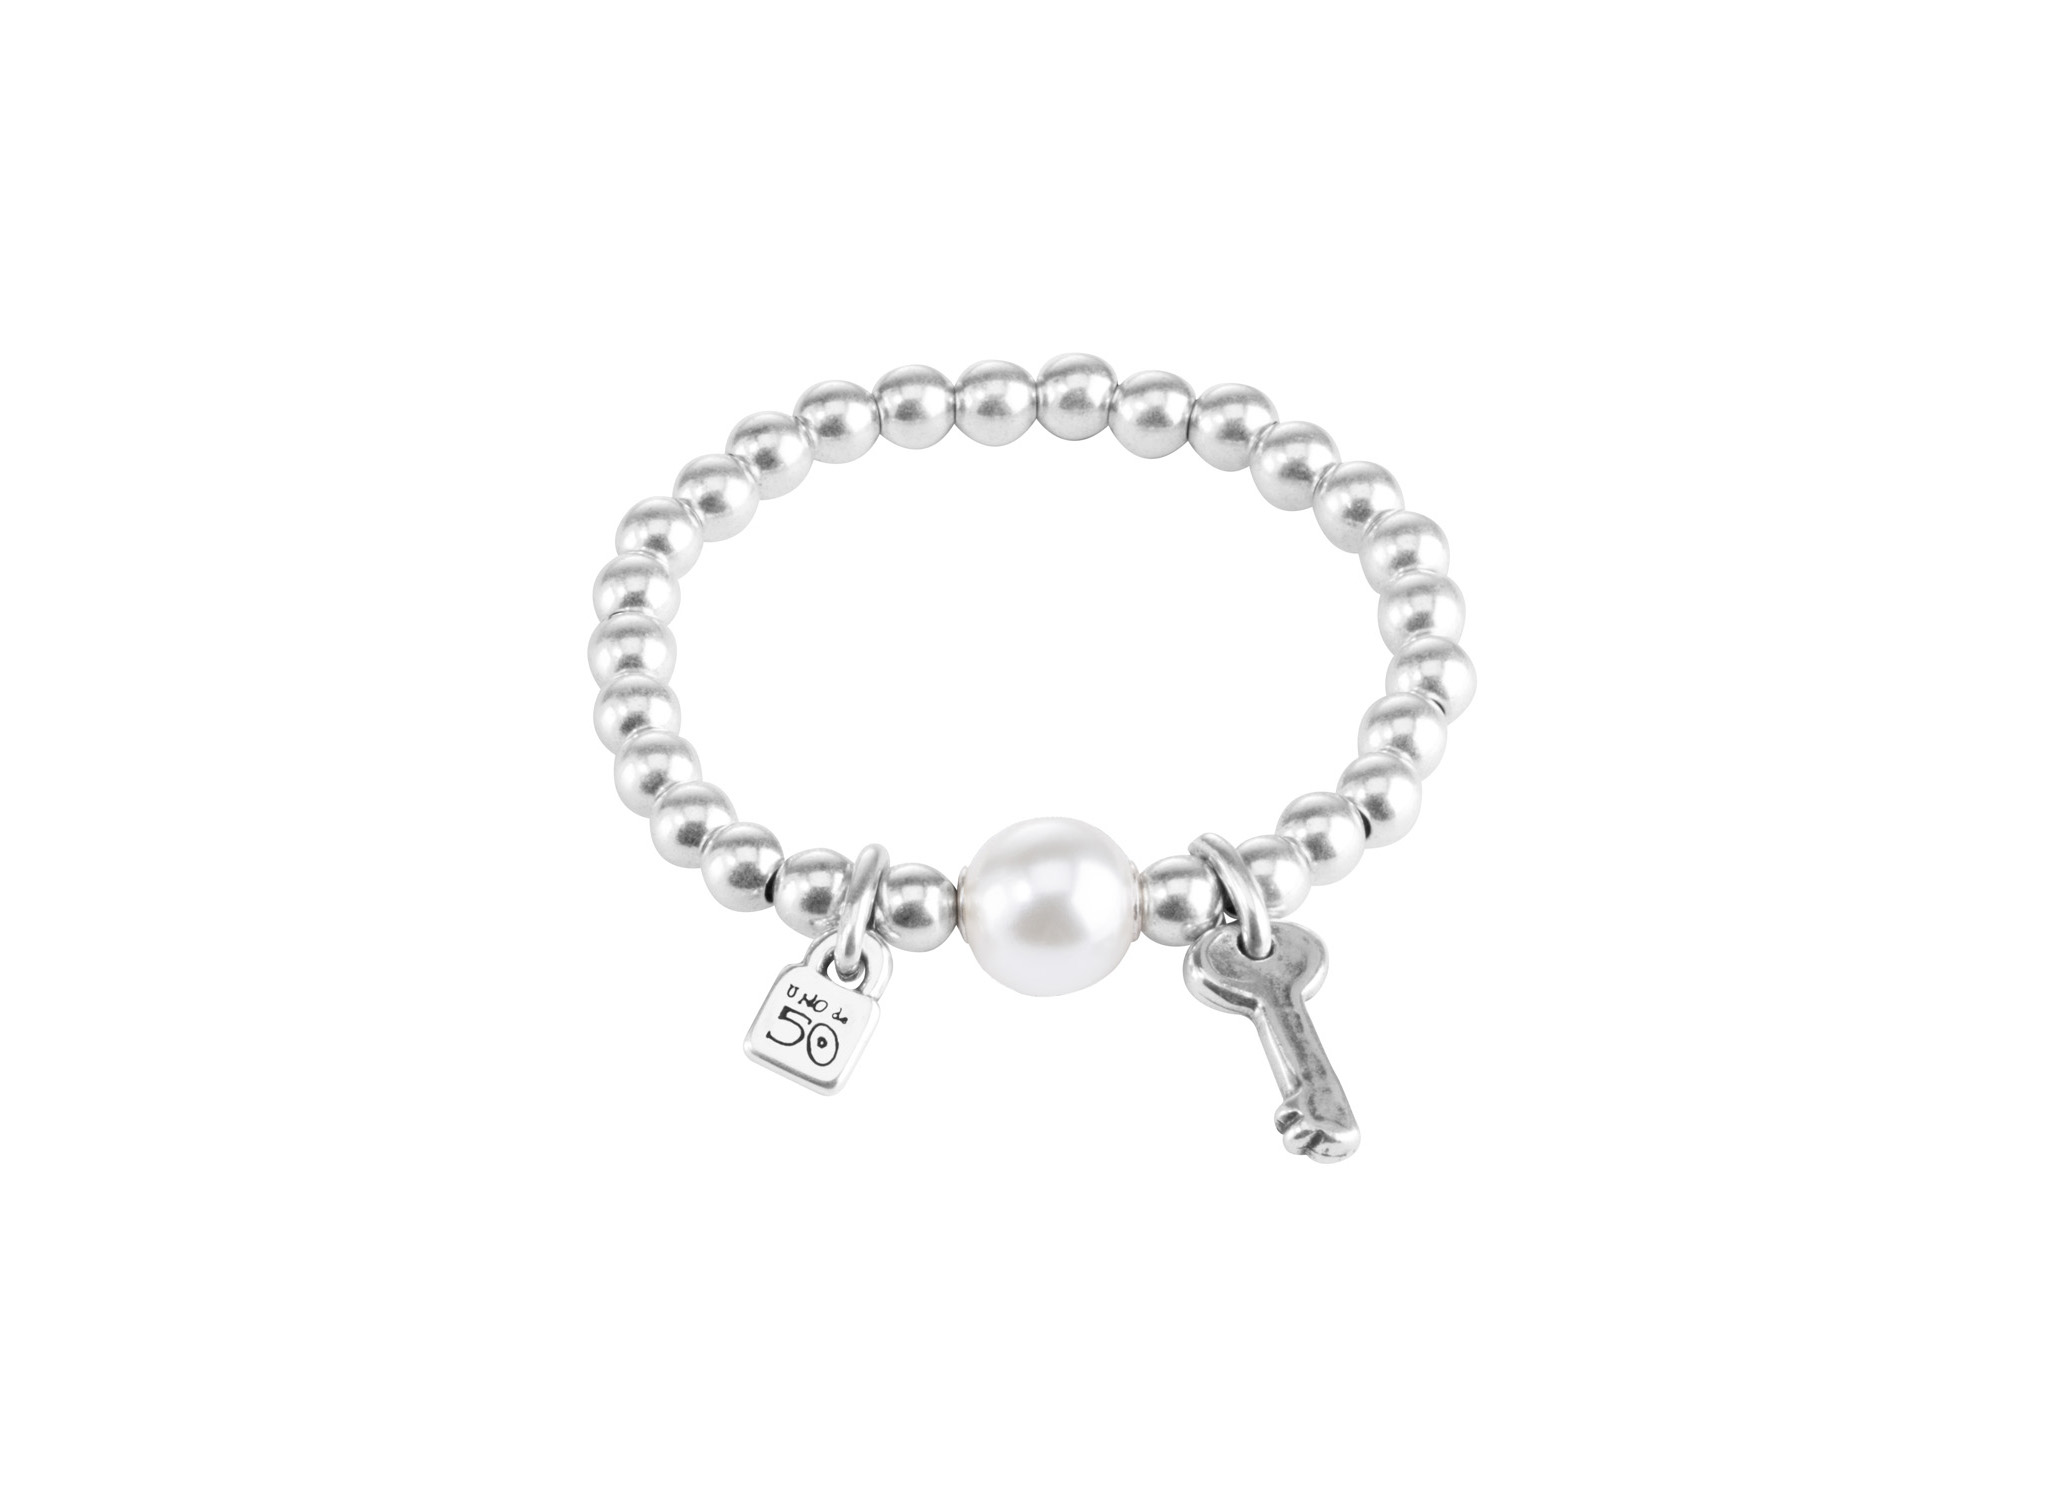 UNODE50 SILVER PLATED PEARL AND KEY BEADED BRACELET SIZE MEDIUM